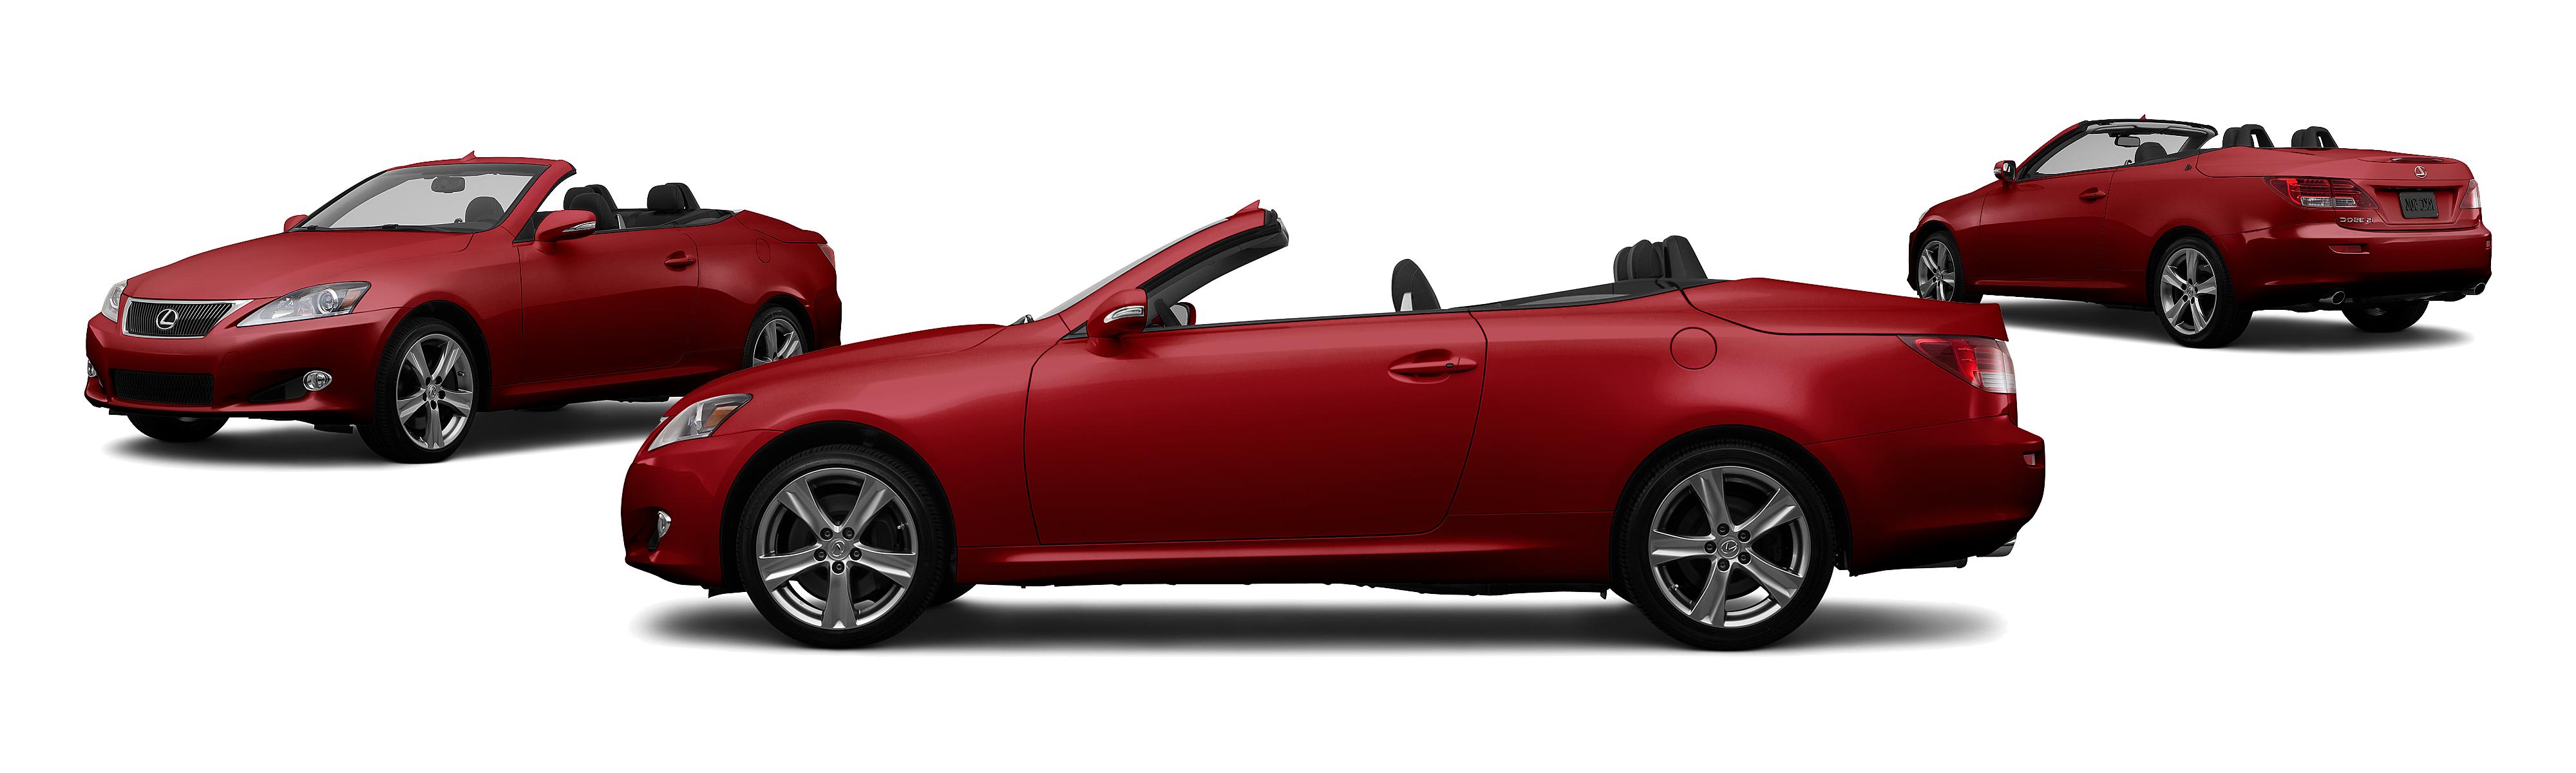 2012 Lexus IS 350C 2dr Convertible - Research - GrooveCar